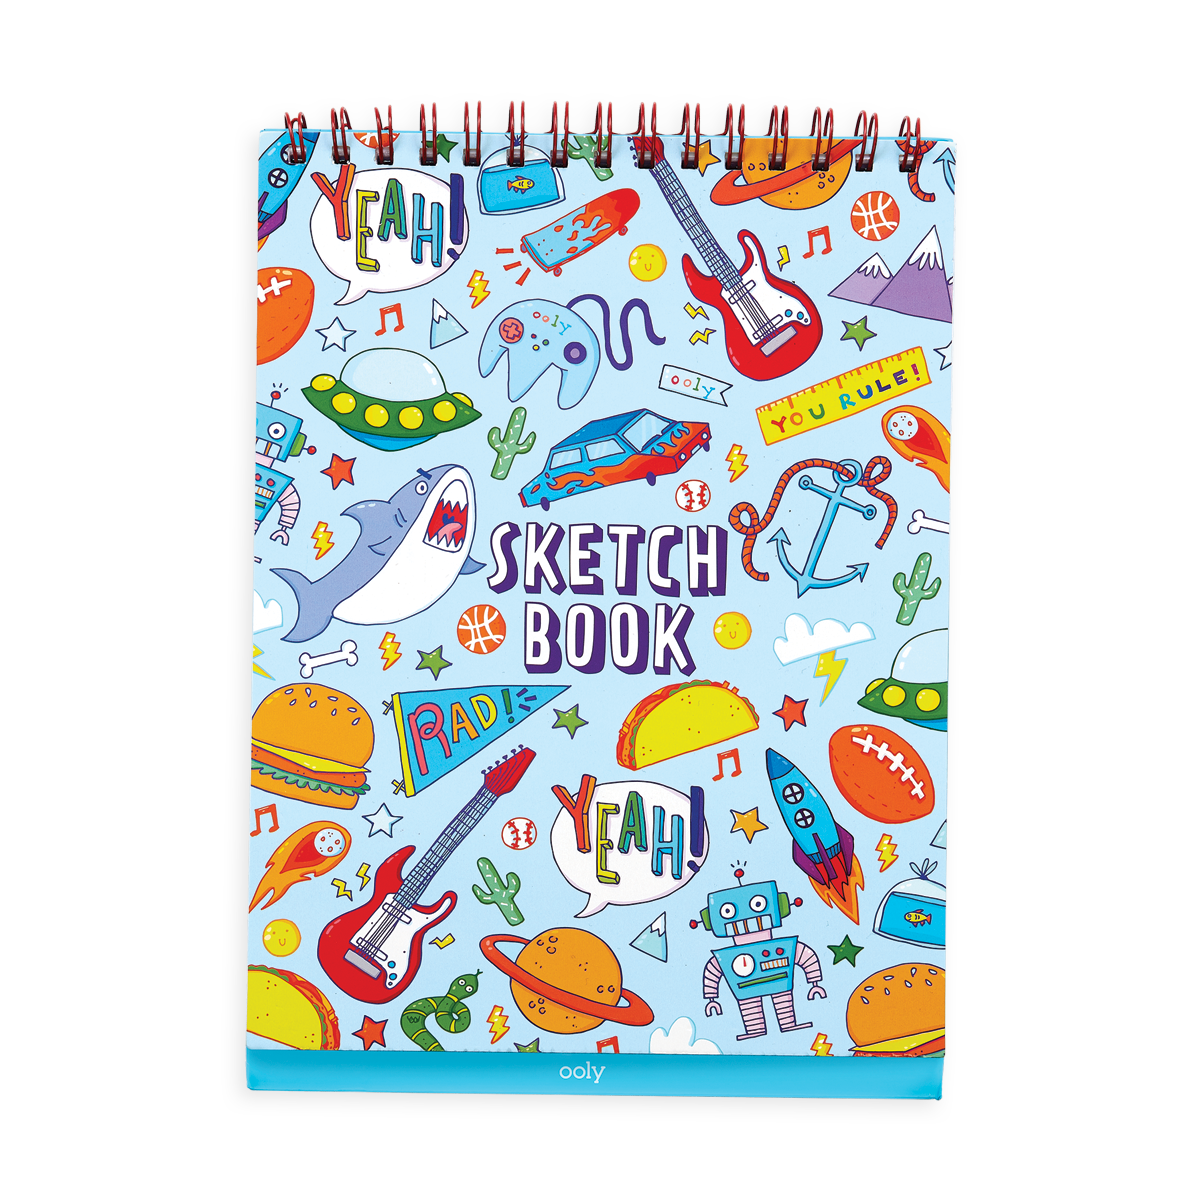 Sketchbook For Adults Christmas Gifts View: Childrens Sketch Book